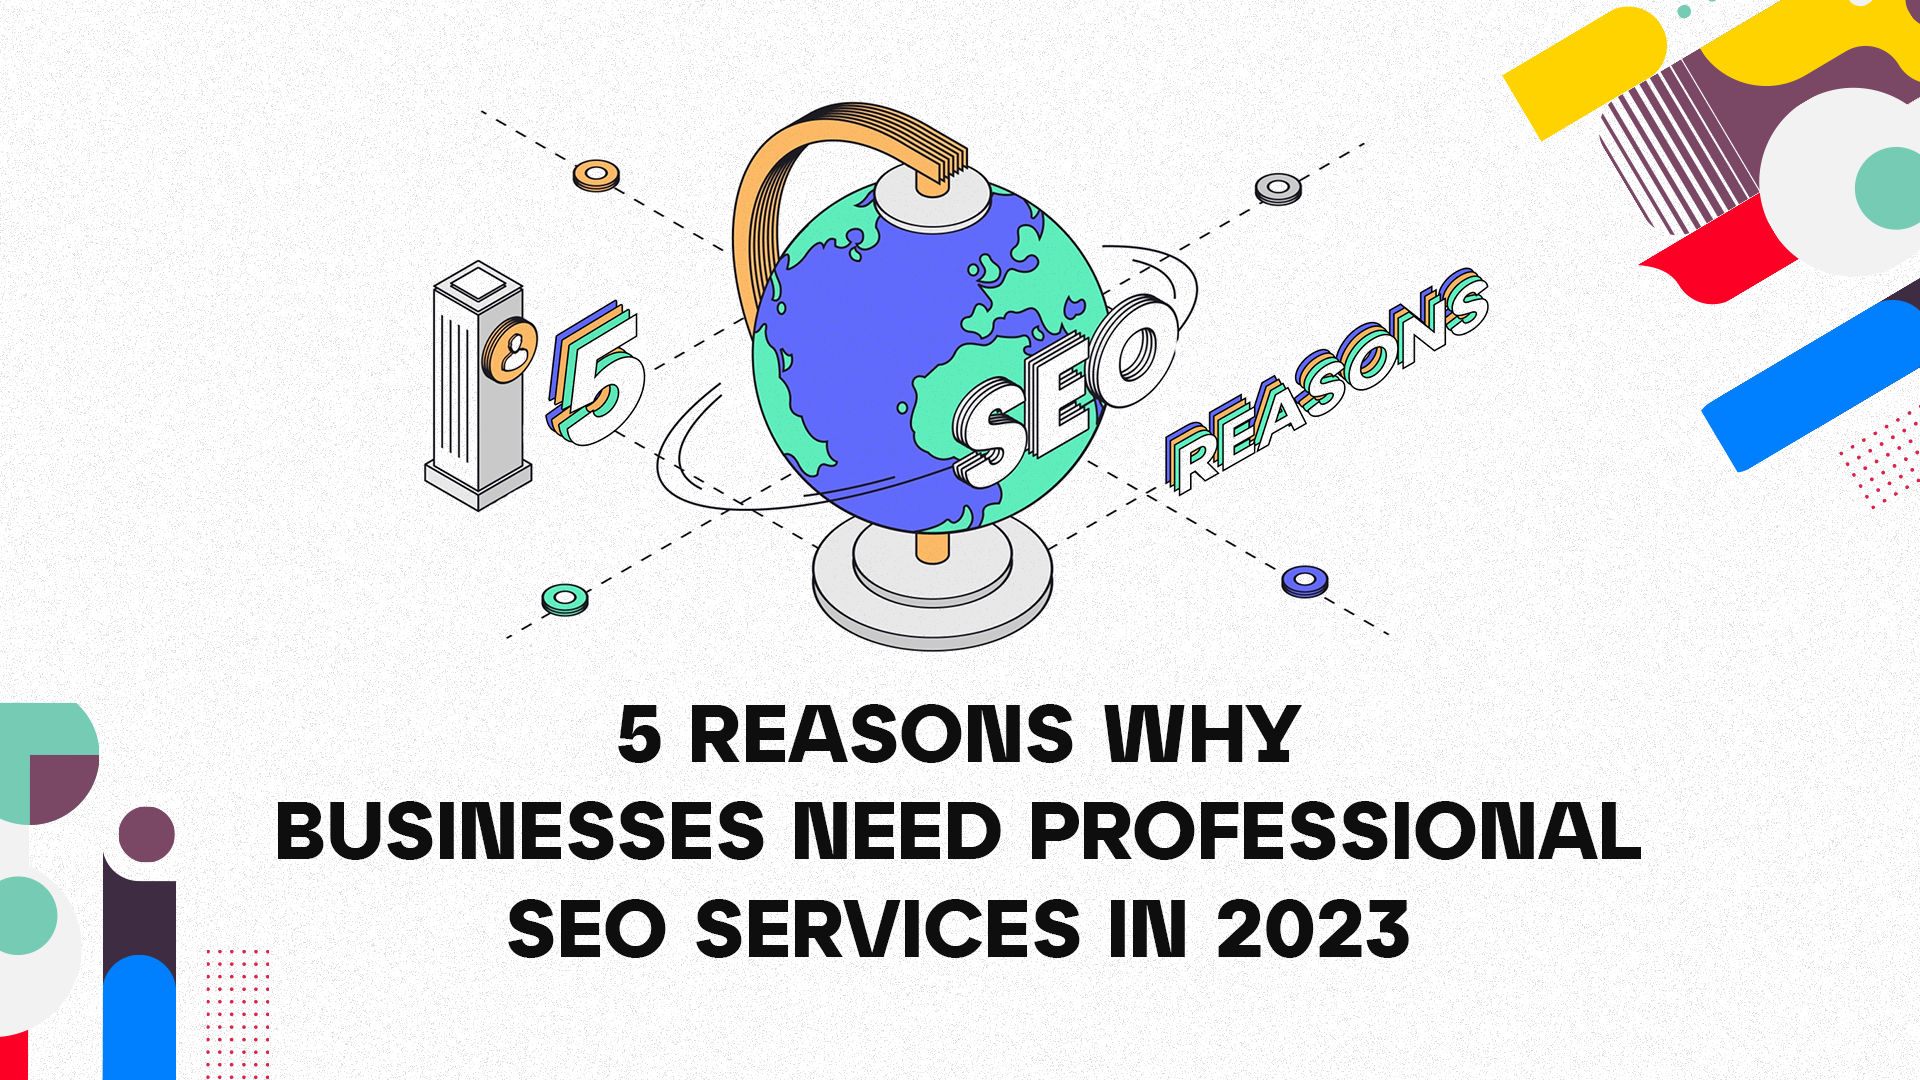 5 Reasons Why Businesses Need Professional SEO Services in 2023